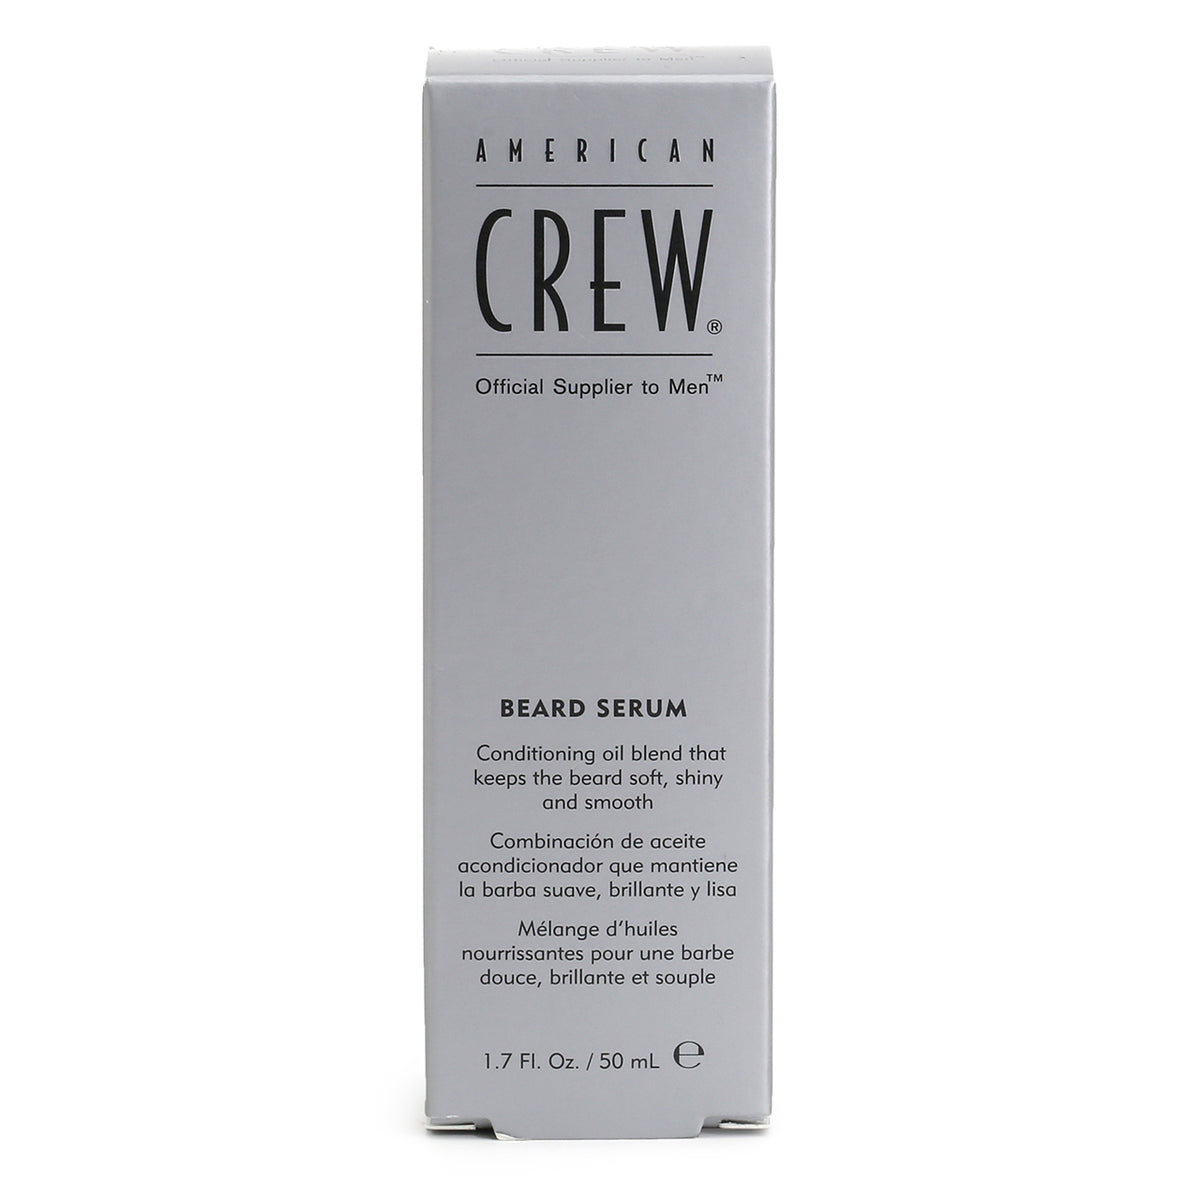 Silver cardboard packaging for American Crew Beard Serum - Conditioning oil blend that keeps the beard soft, shiny and smooth.